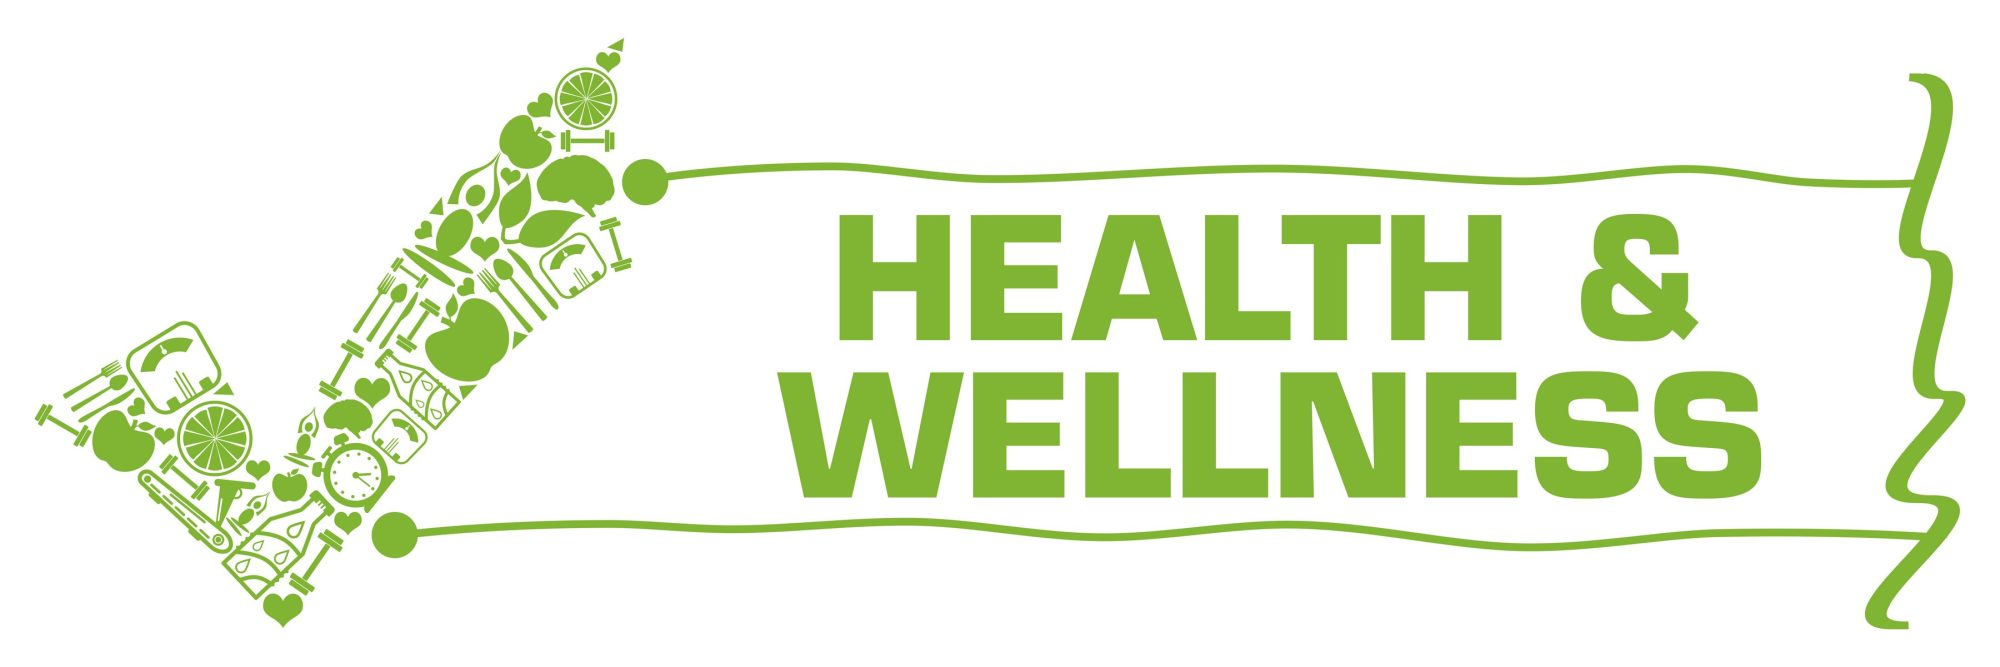 Healthy Vending Tucson | Workplace Wellness | Healthy Employees